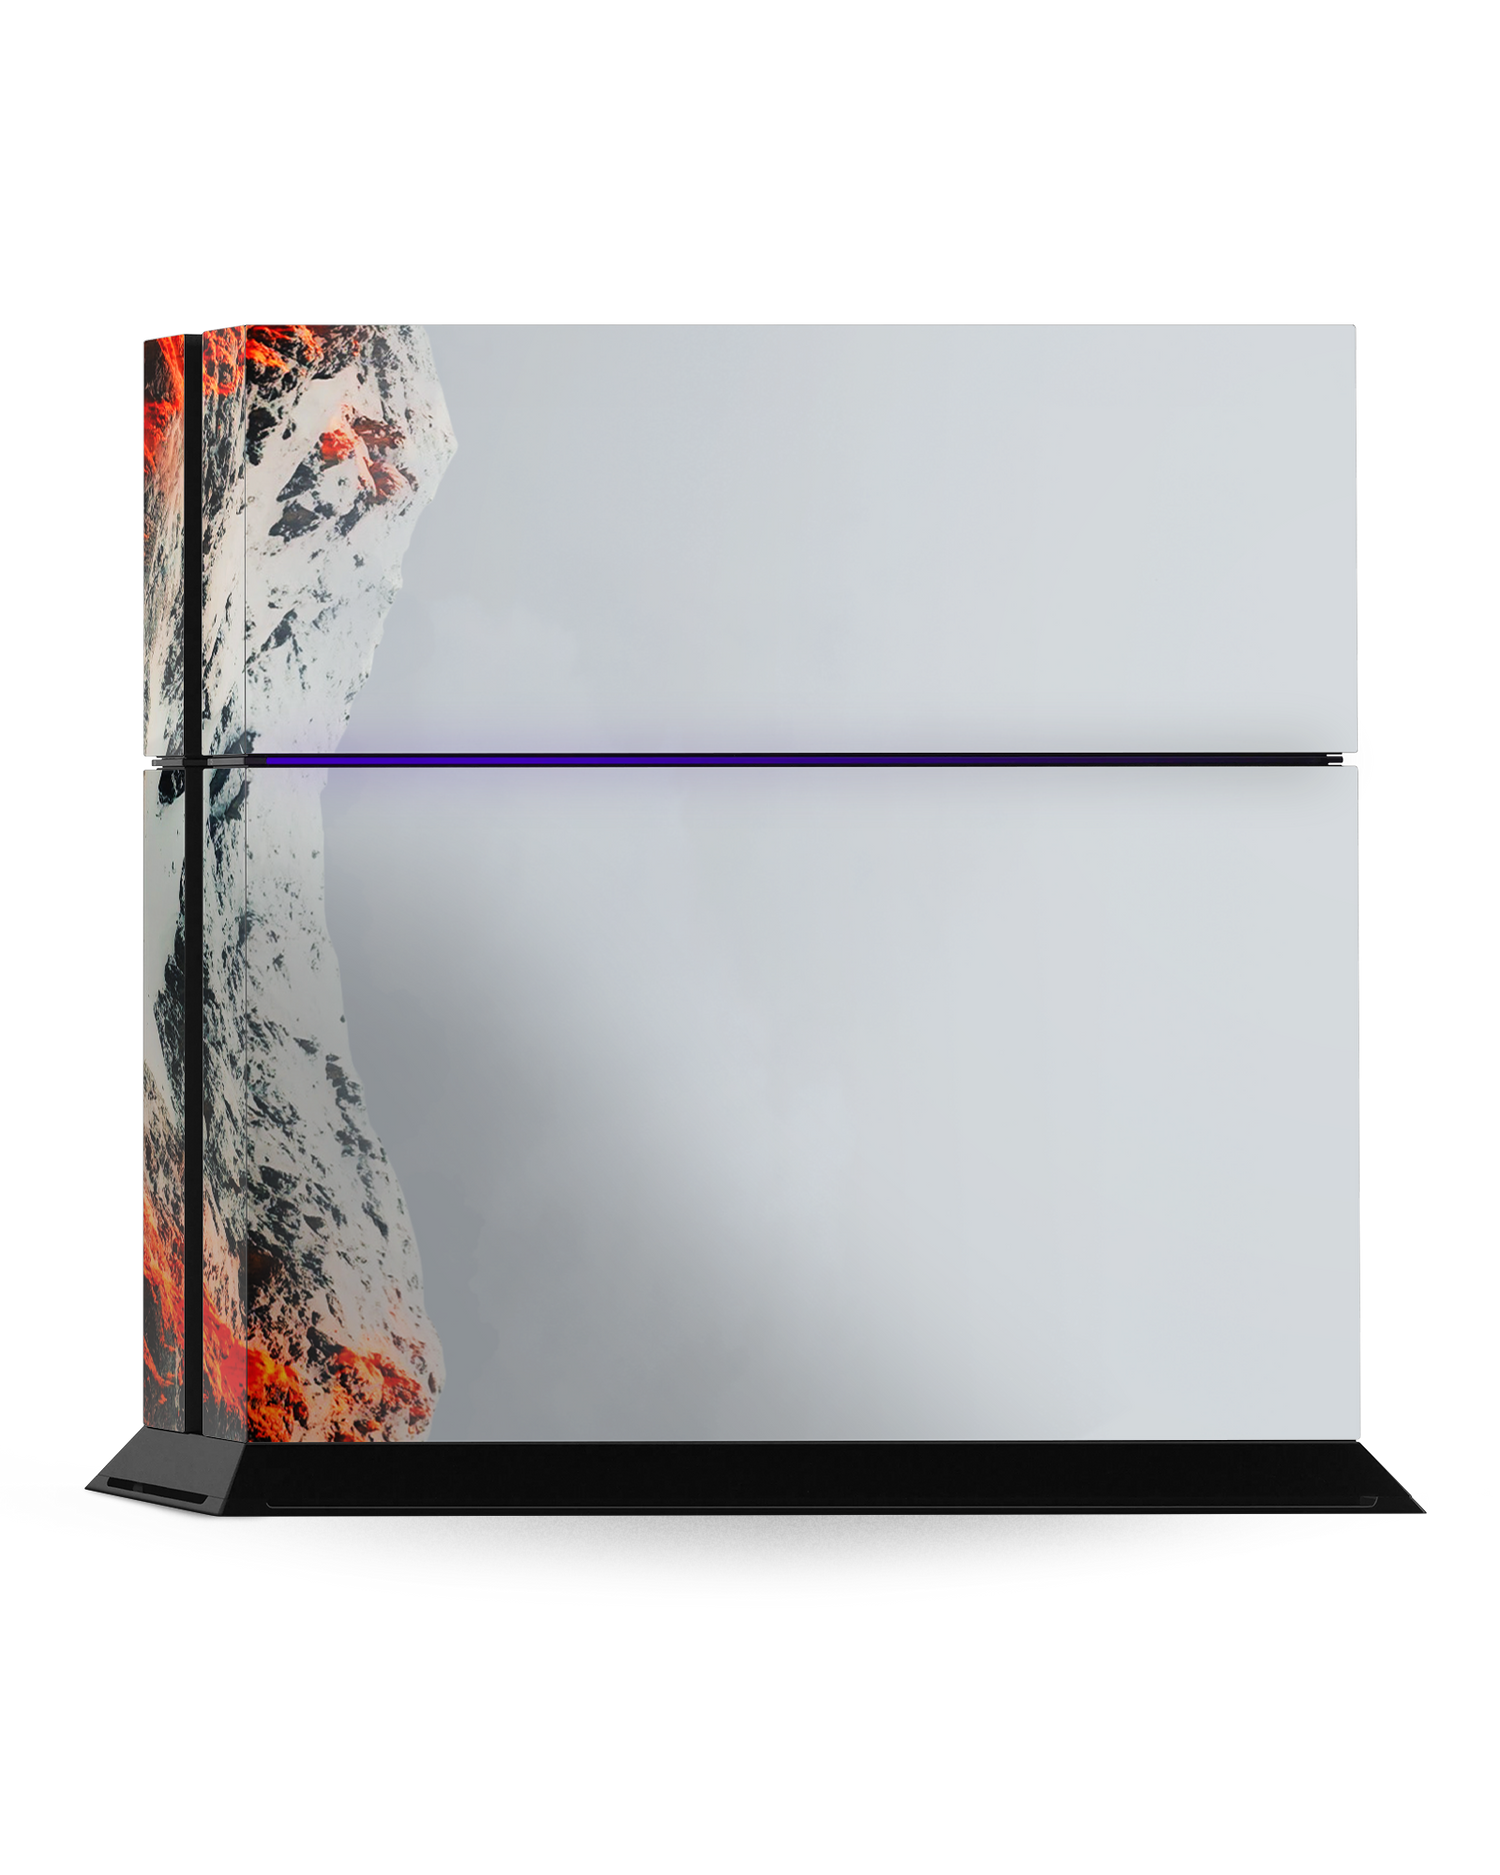 High Peak Console Skin for Sony PlayStation 4: Standing